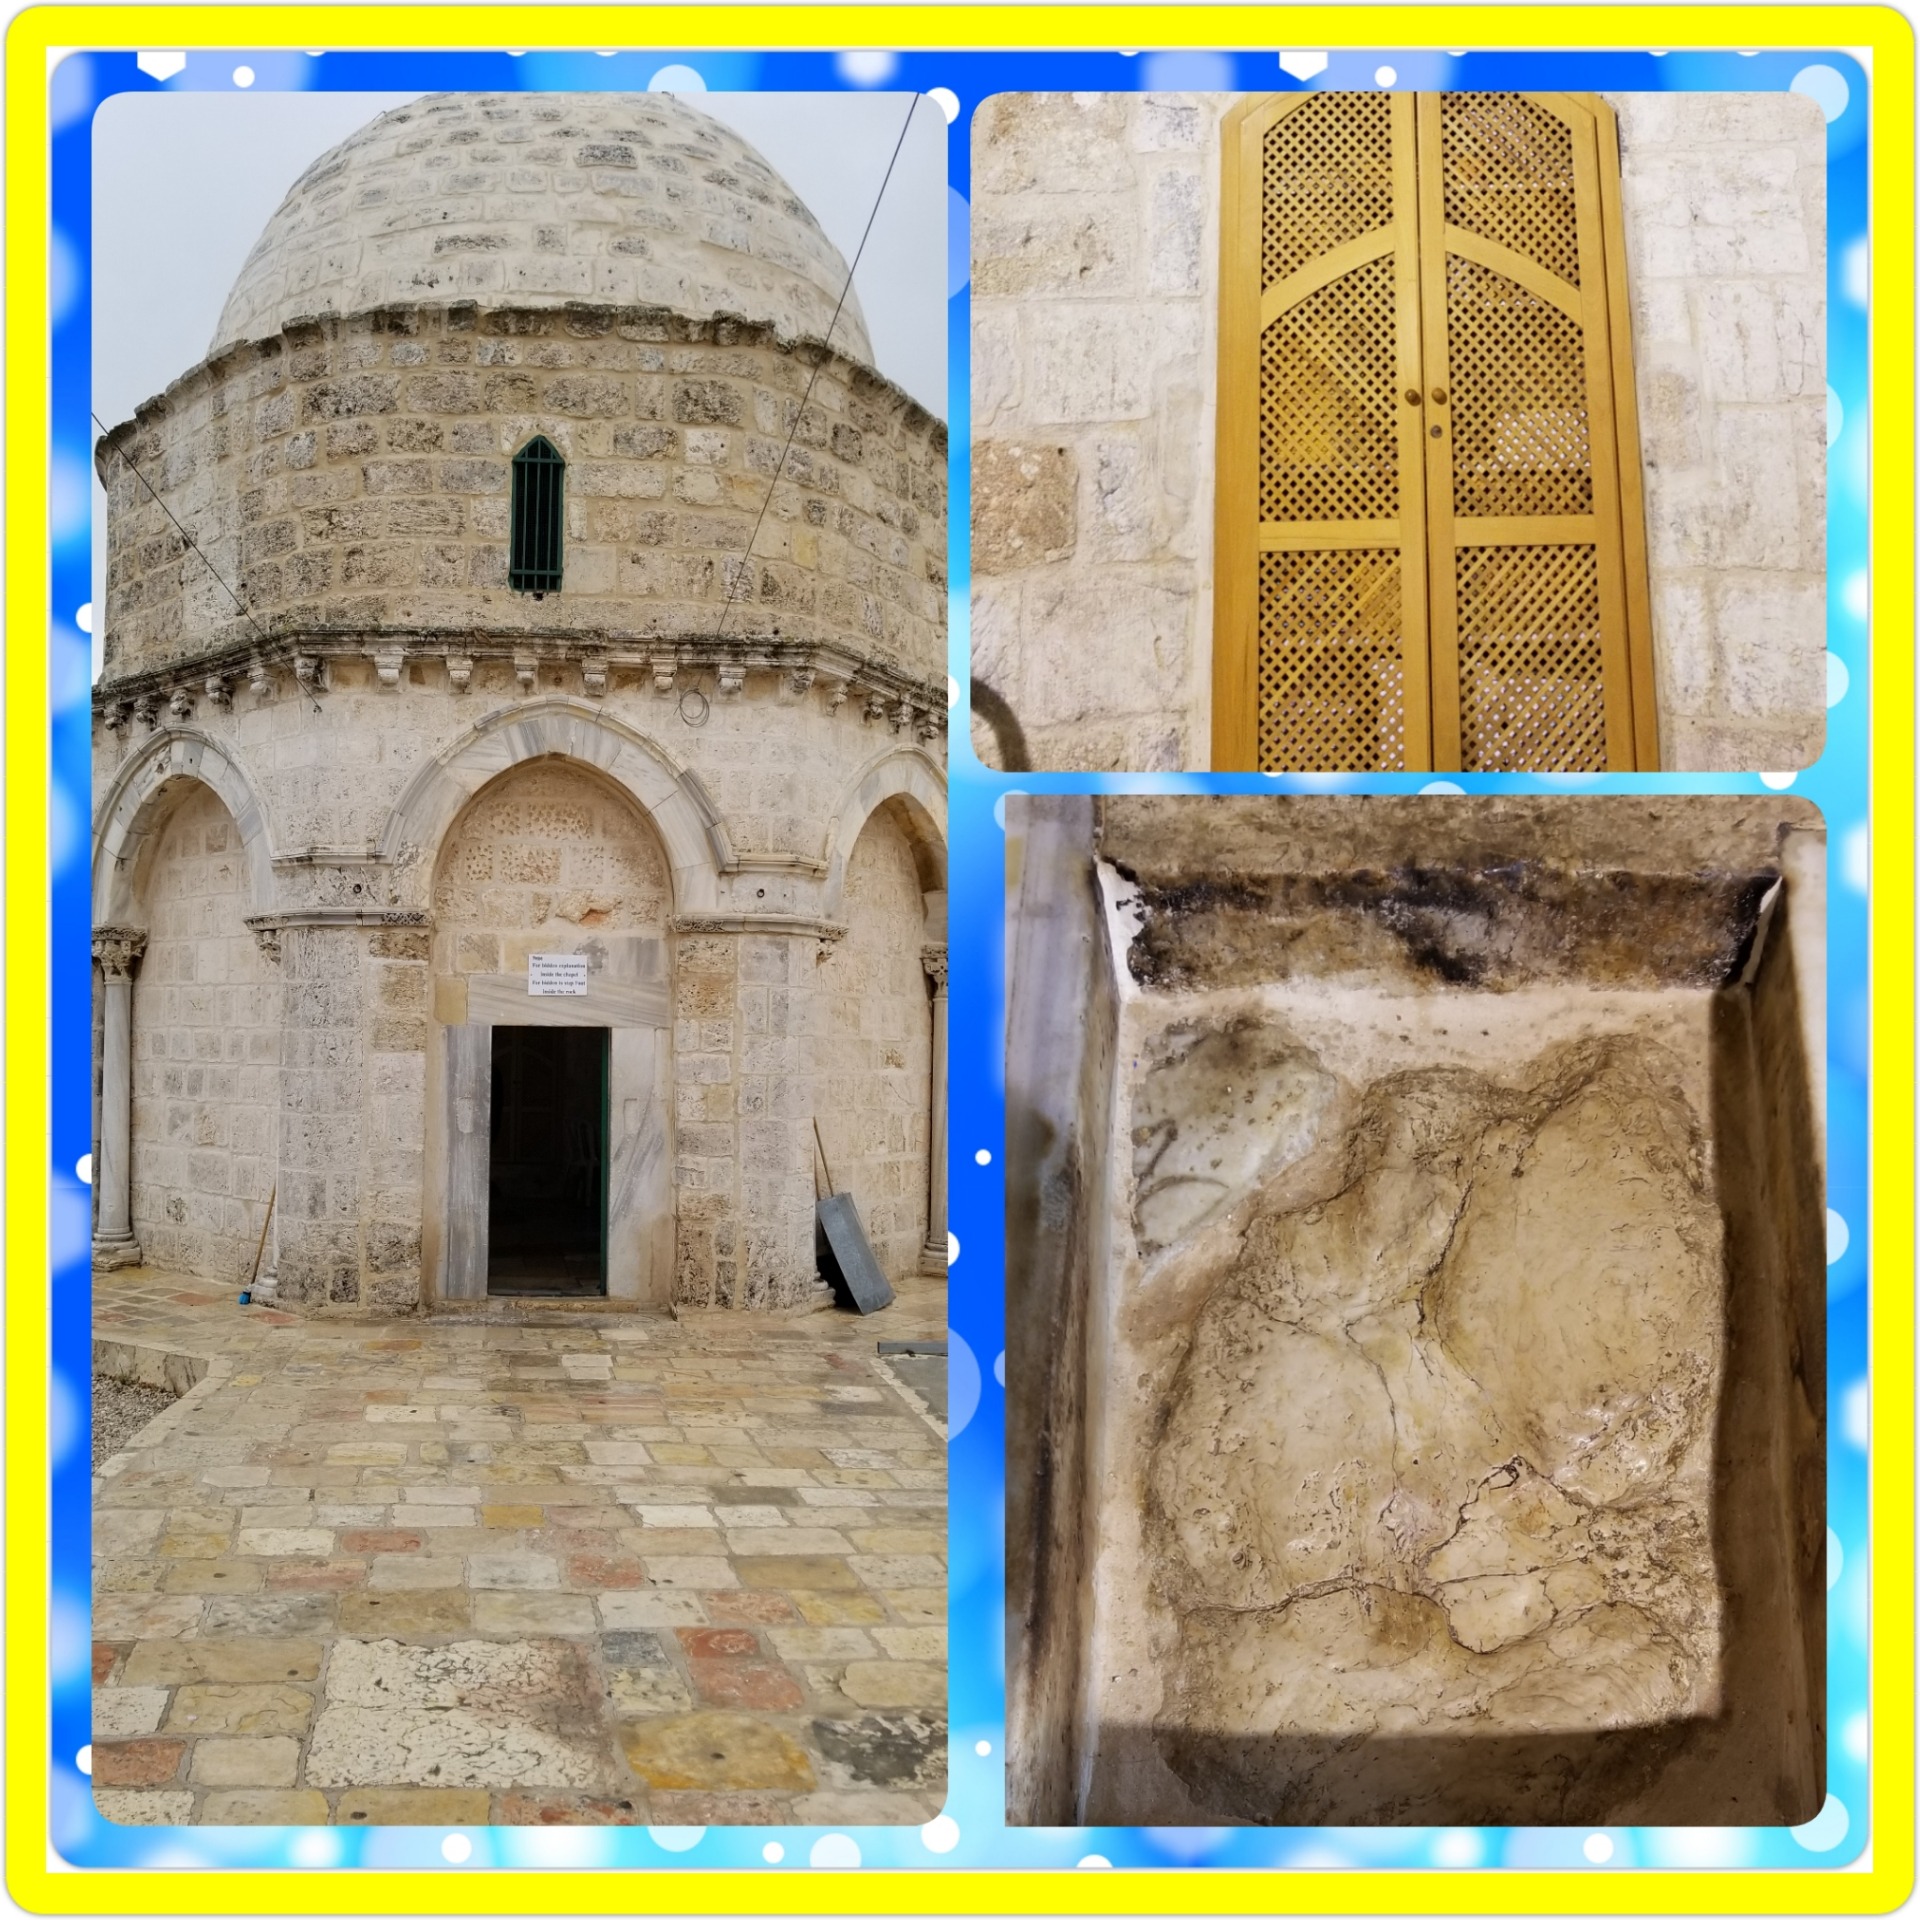 First Friday Adventure in Jerusalem - Mount of Olives/Church of Ascension 